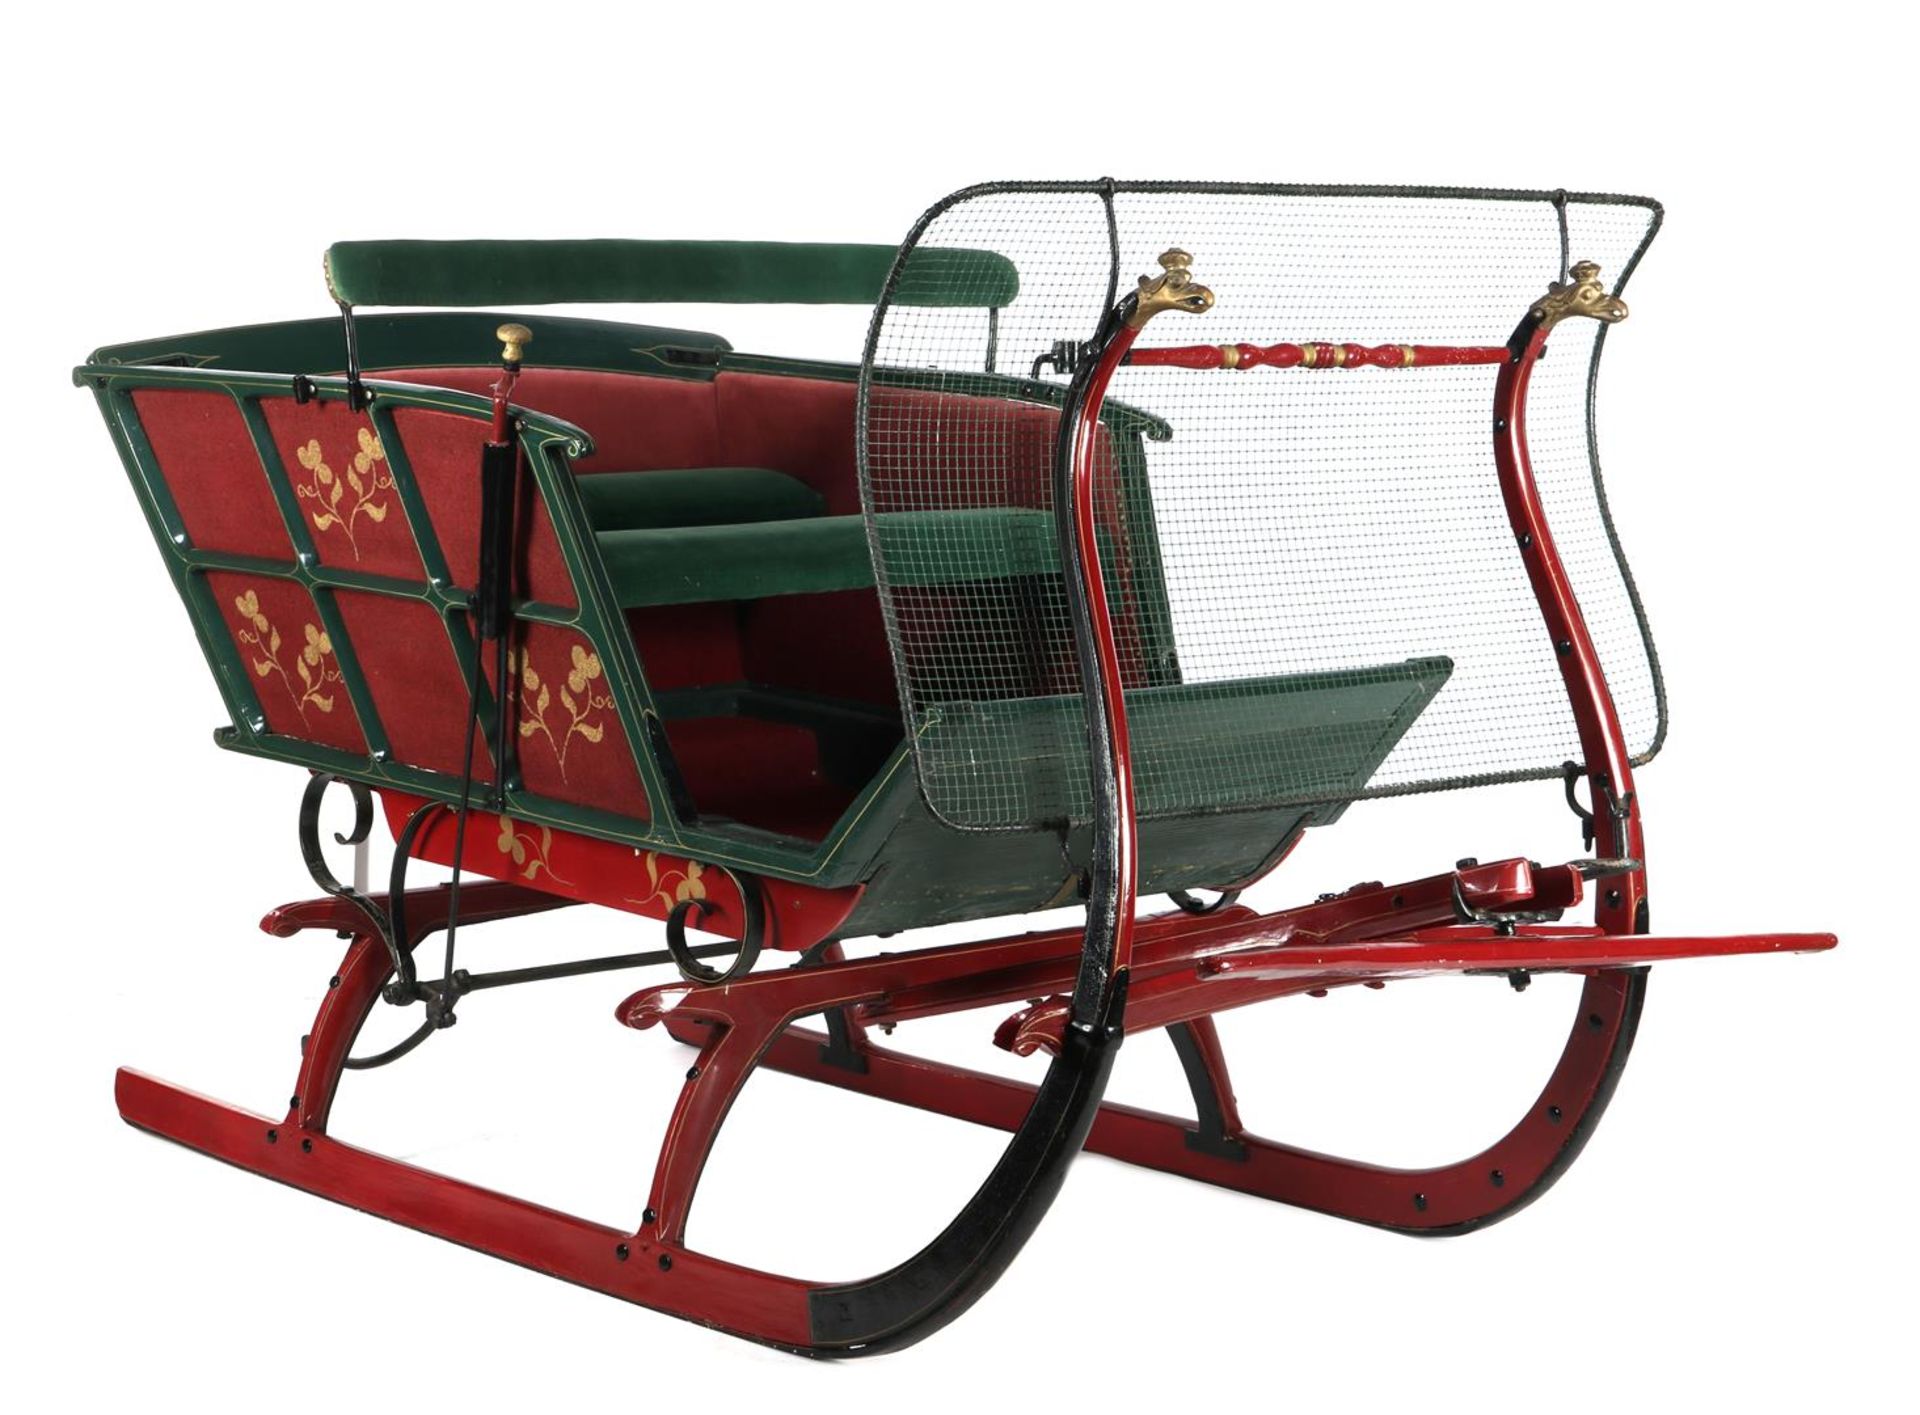 Green and red lacquered wooden and metal sleigh with upholstery